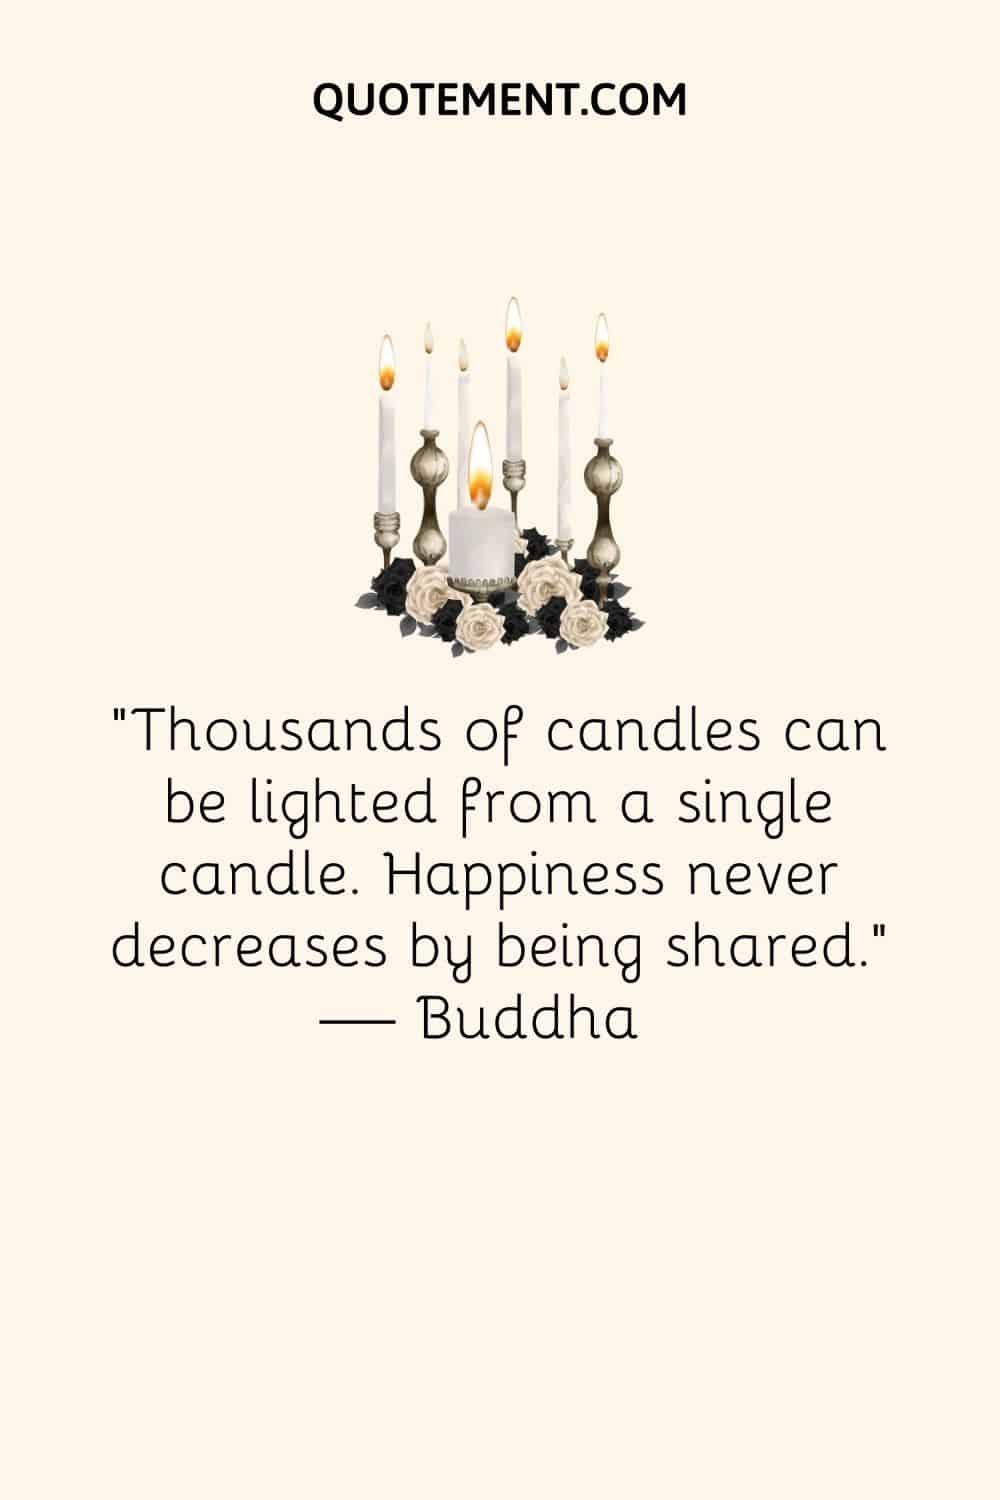 candles and white roses image representing best light quote